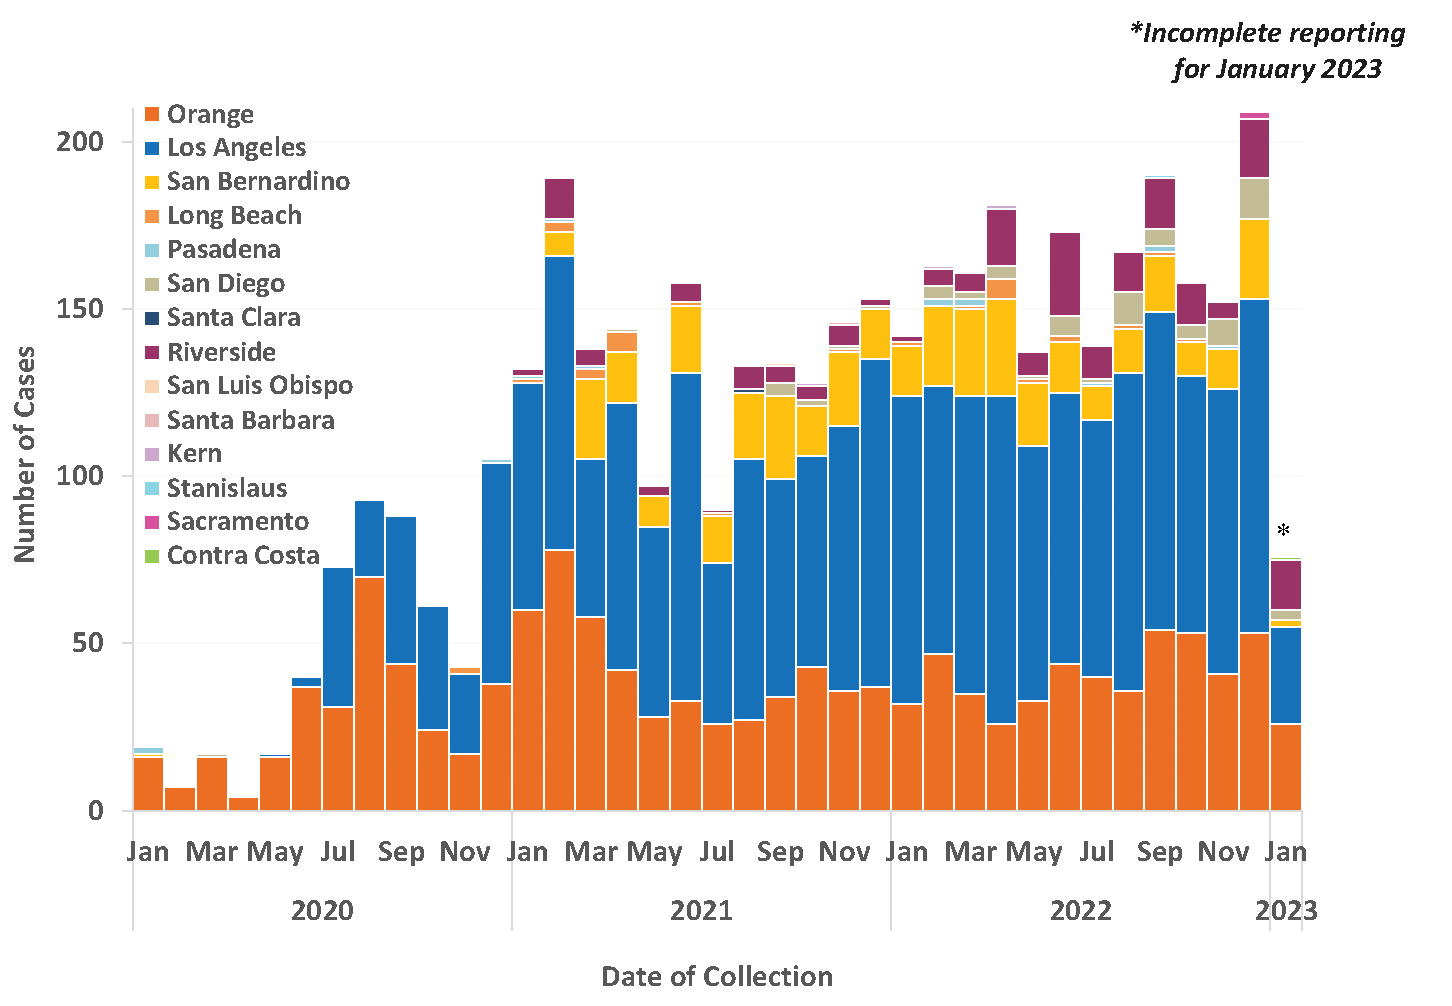 Graph of Cauris Surveillance Cases Reported in February 2023